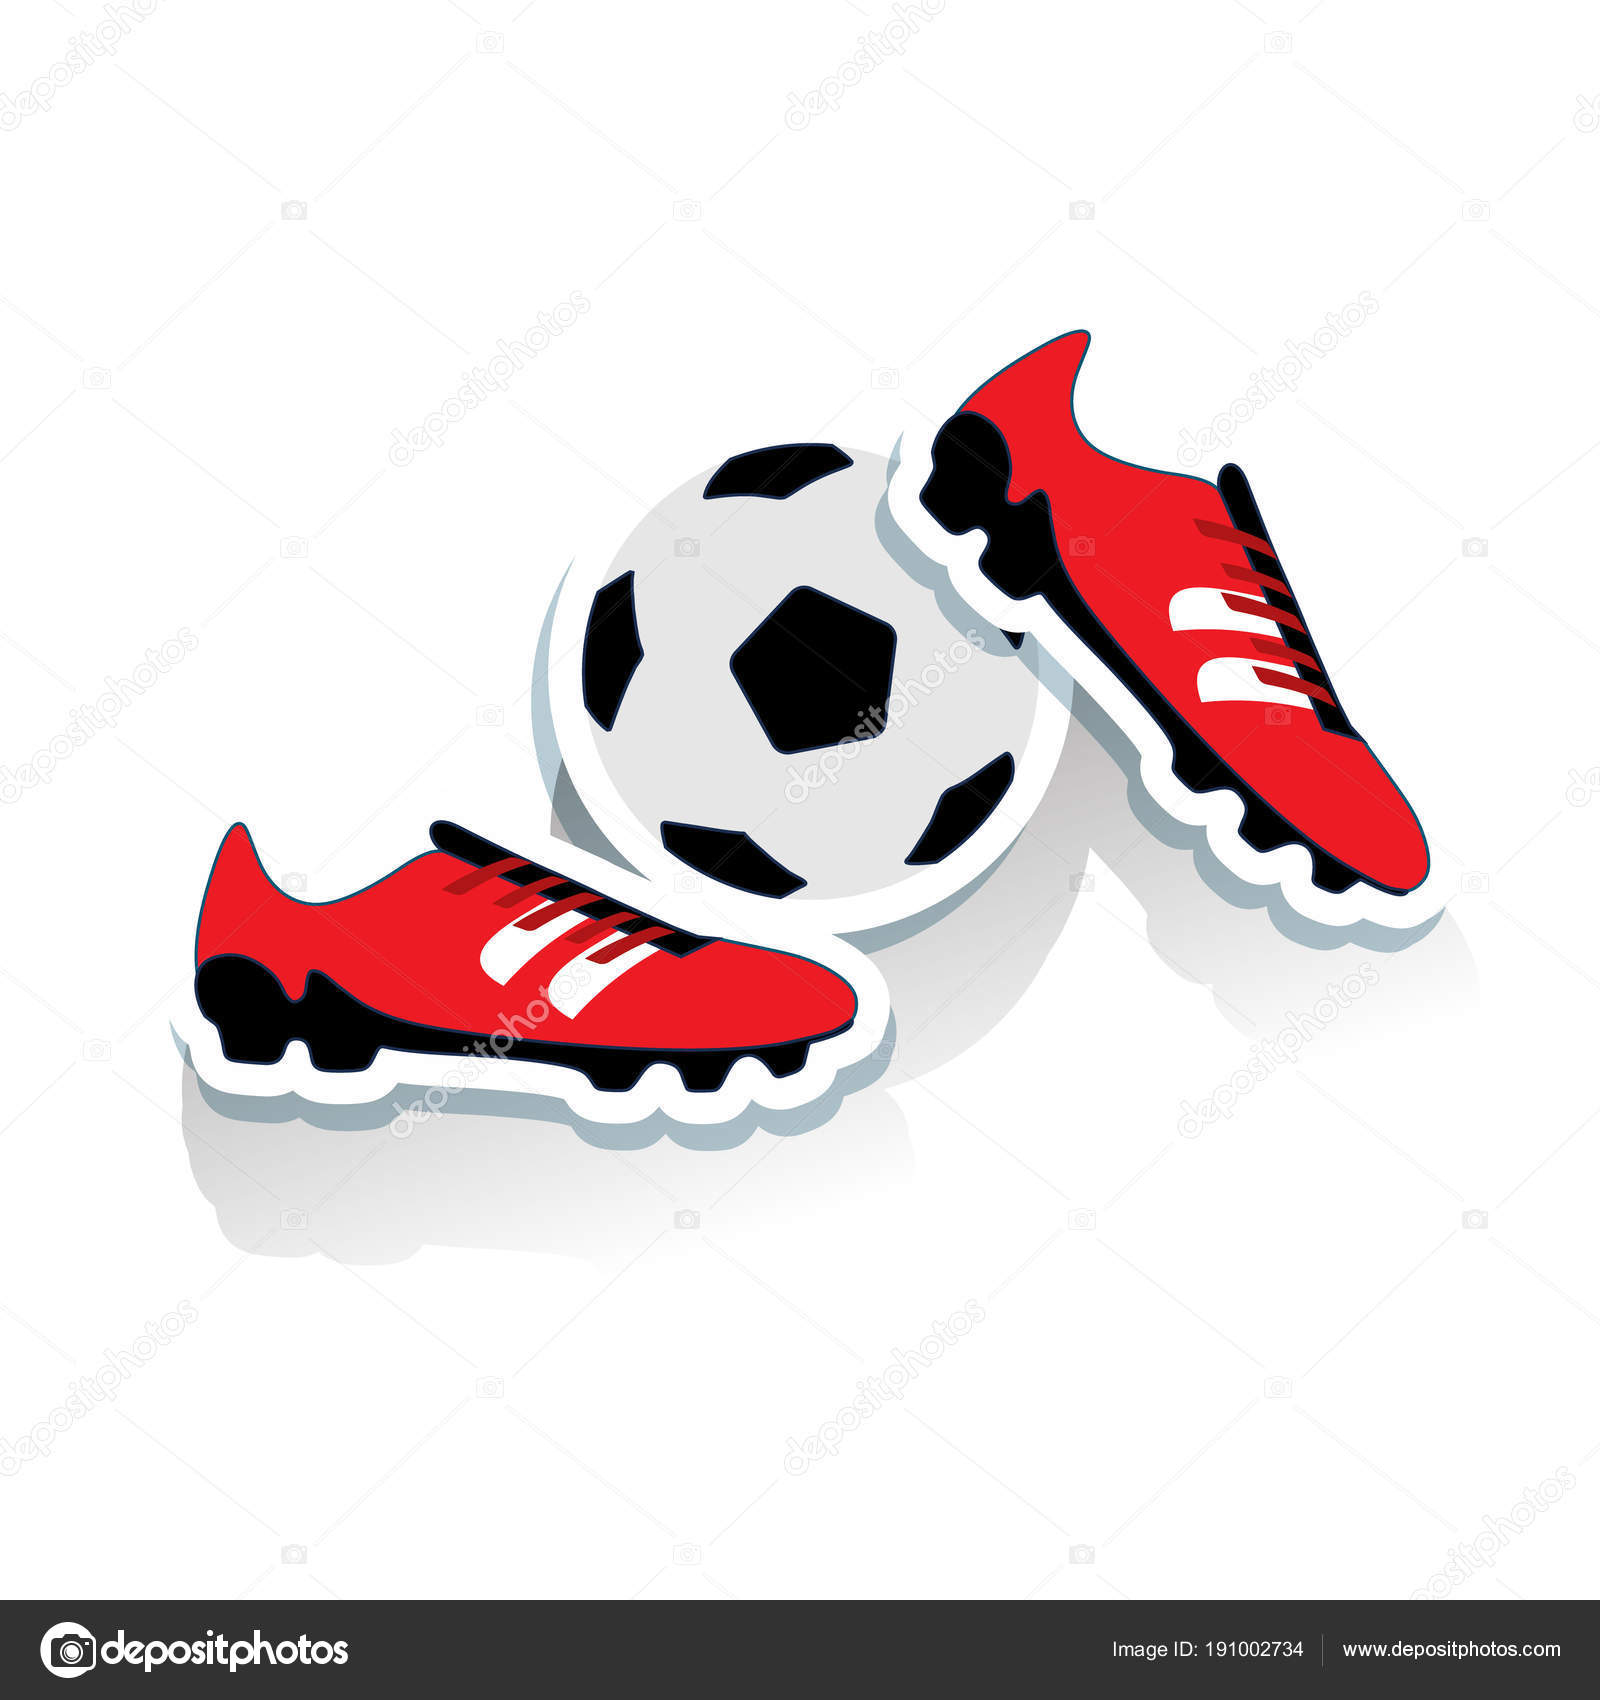 Images: soccer shoes cartoon | Red 